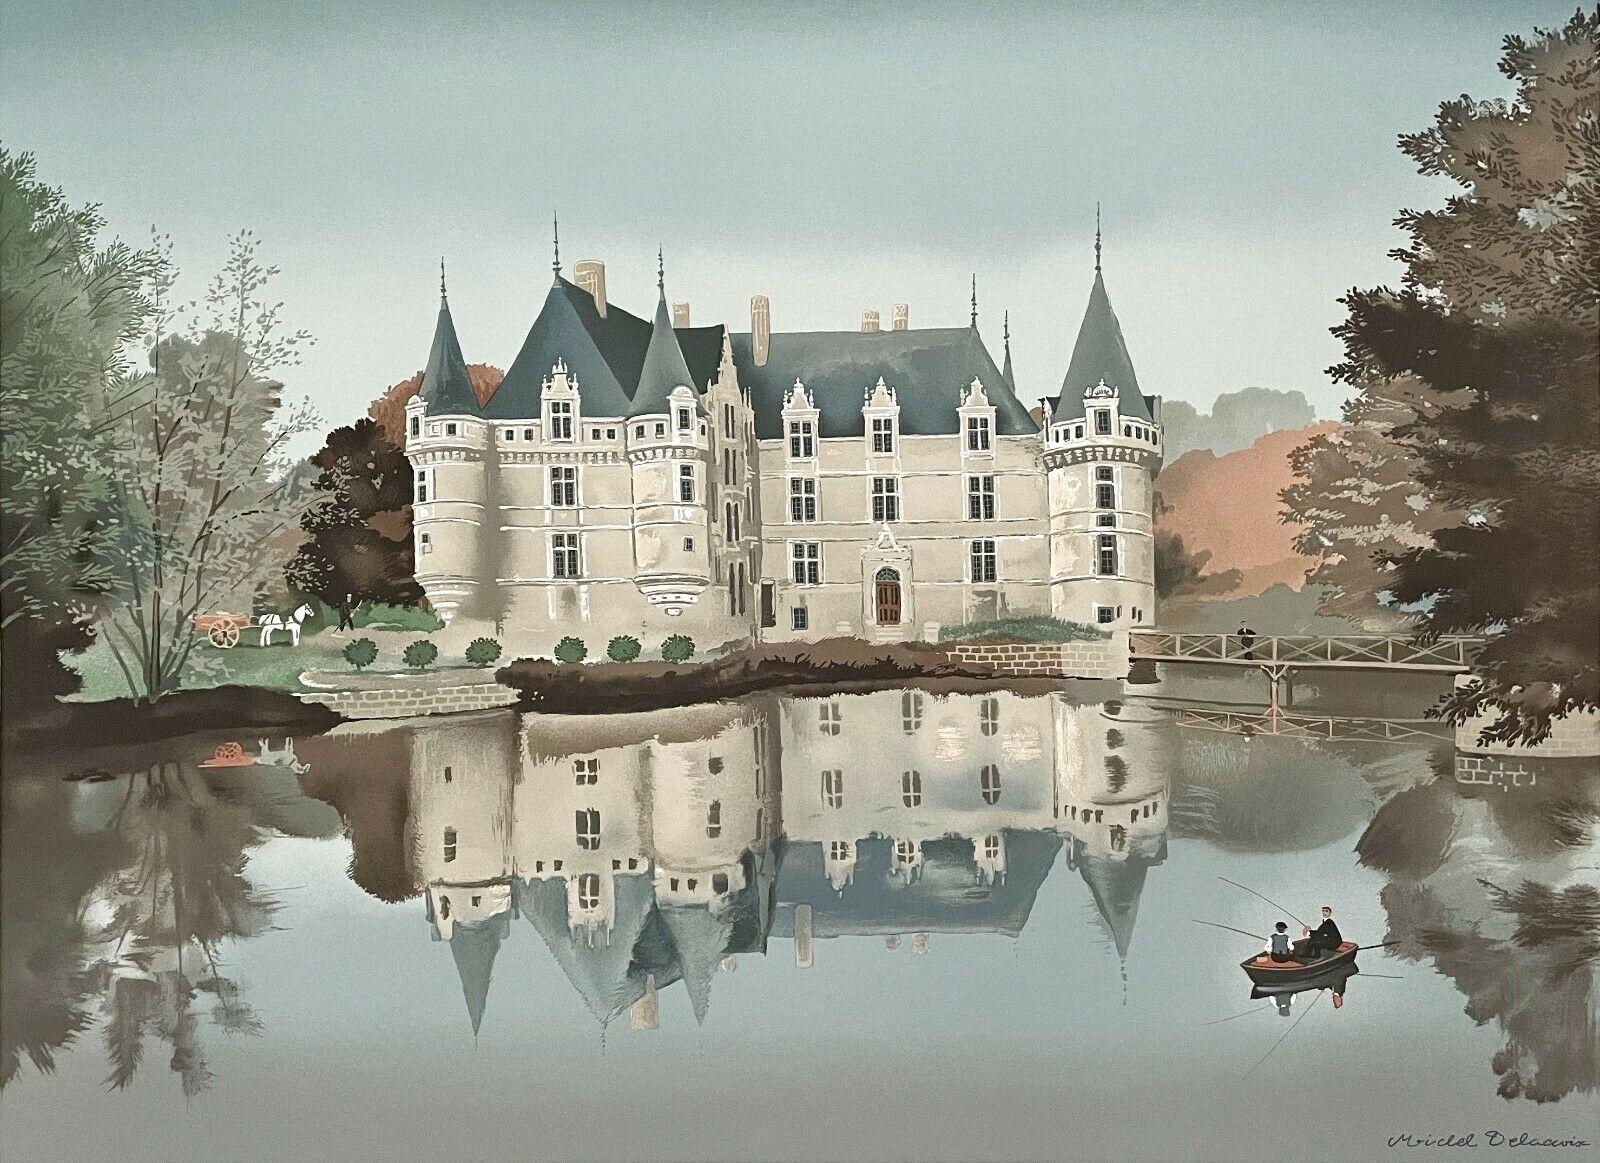 MICHEL DELACROIX (1933- ) Internationally renowned French painter Michel Delacroix is an acclaimed master of the naïf tradition and one of the most popular collected artists in the world today. A self-styled "painter of dreams and of the poetic